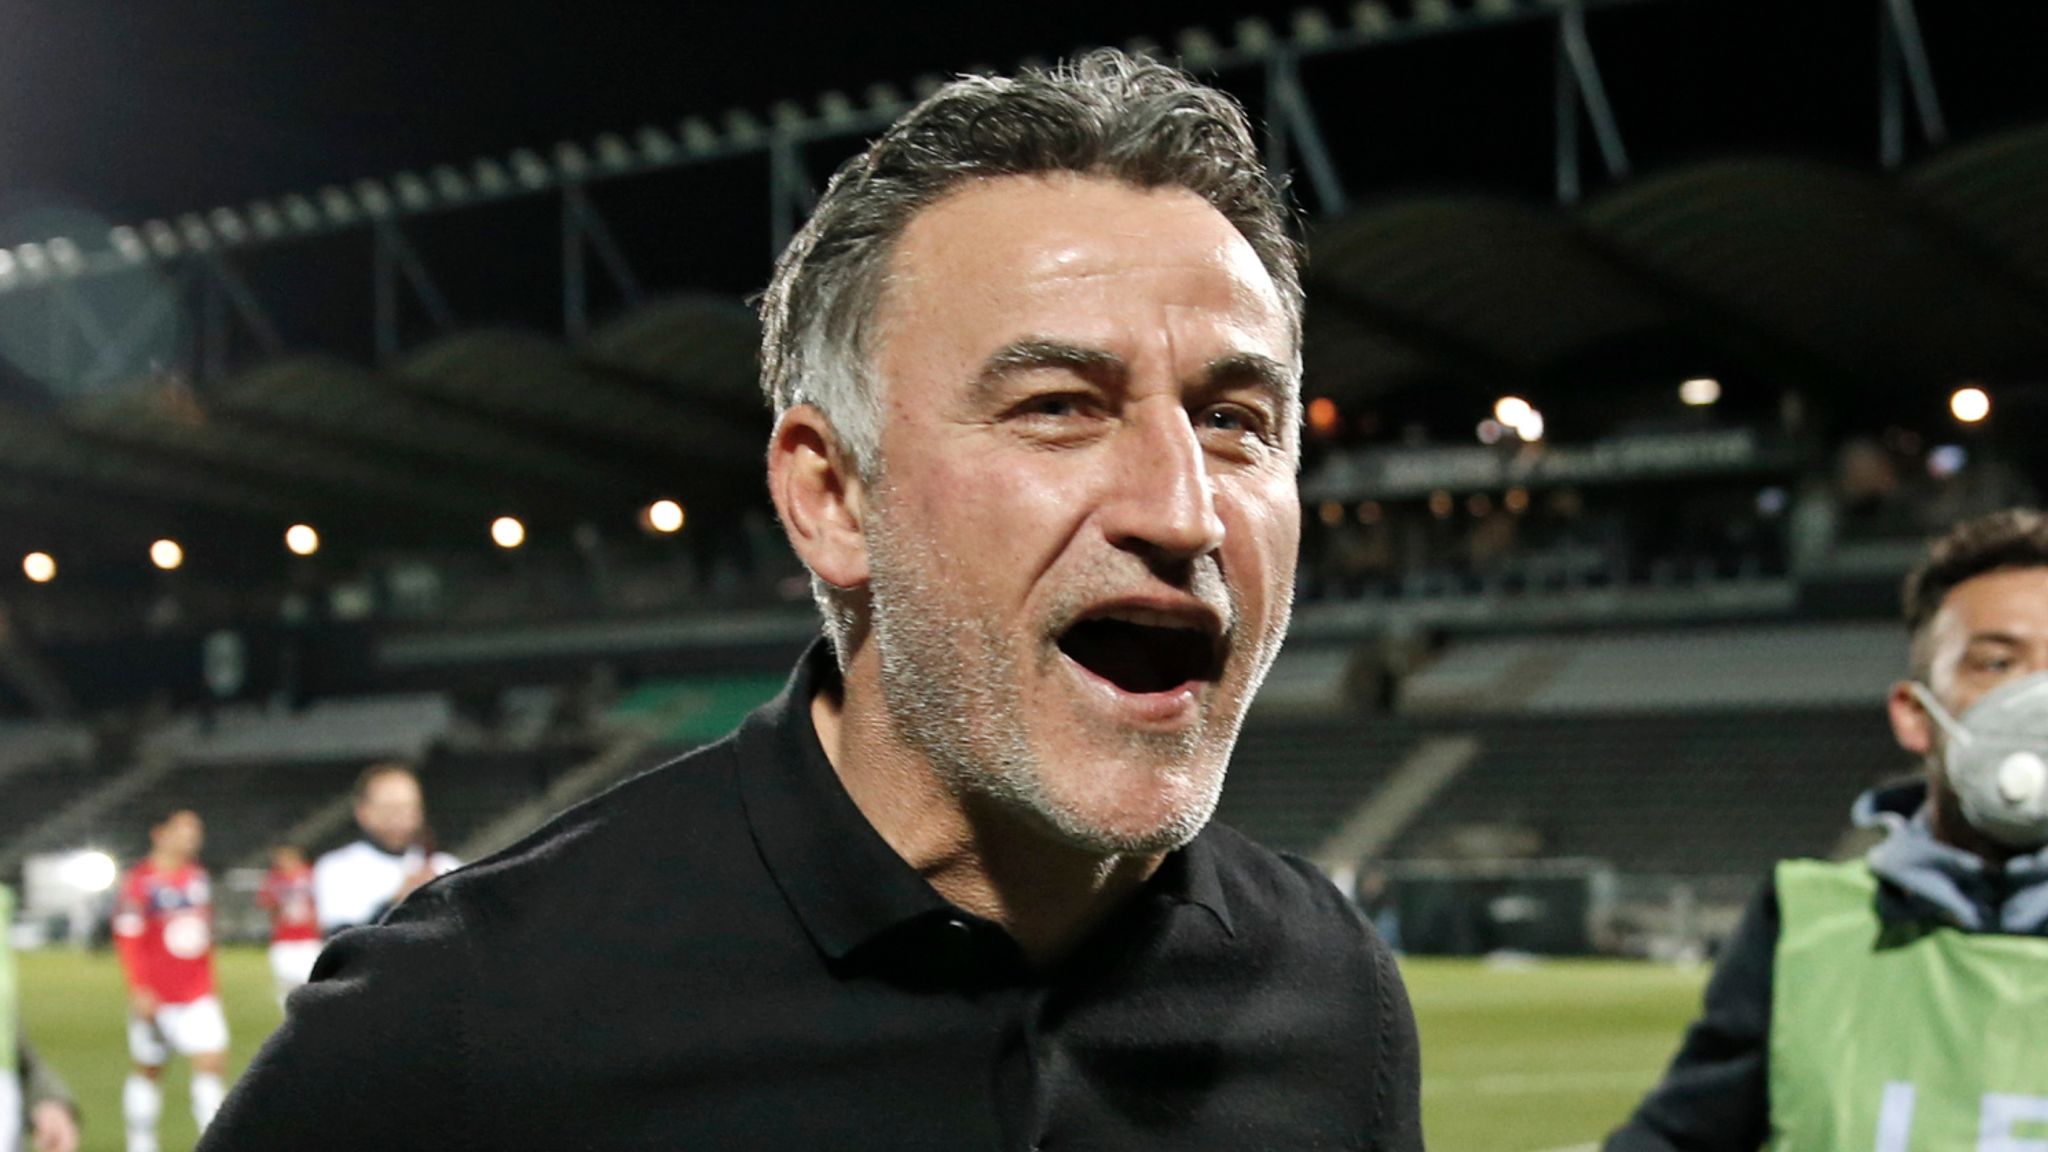 Lille&#39;s head coach Christophe Galtier celebrates after the French League One soccer match between Angers and Lille at the Raymond Kopa Stadium in Angers, France, Sunday May 23, 2021. Lille won the match 2-1 to clinch the French League One title. (AP Photo/Lewis Joly)